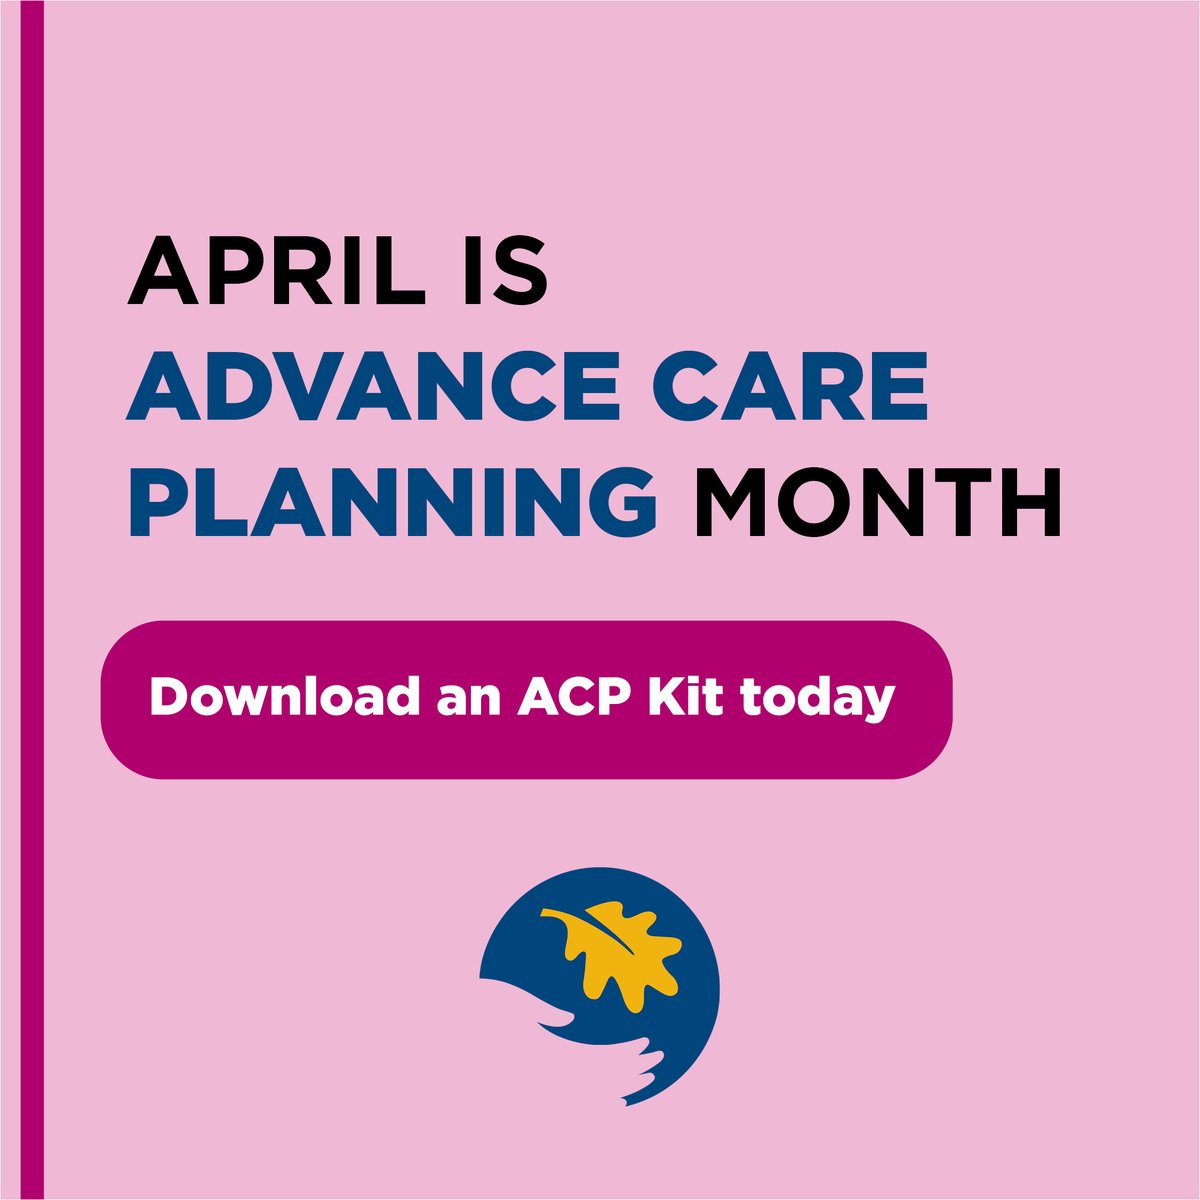 ICYMI: We've redesigned our Advance Care Planning Kit to be simpler, more concise and easier to understand – facilitating the process of documenting your health care directions and appointing a Substitute Decision-Maker. Download today. ow.ly/59b350RfkEA